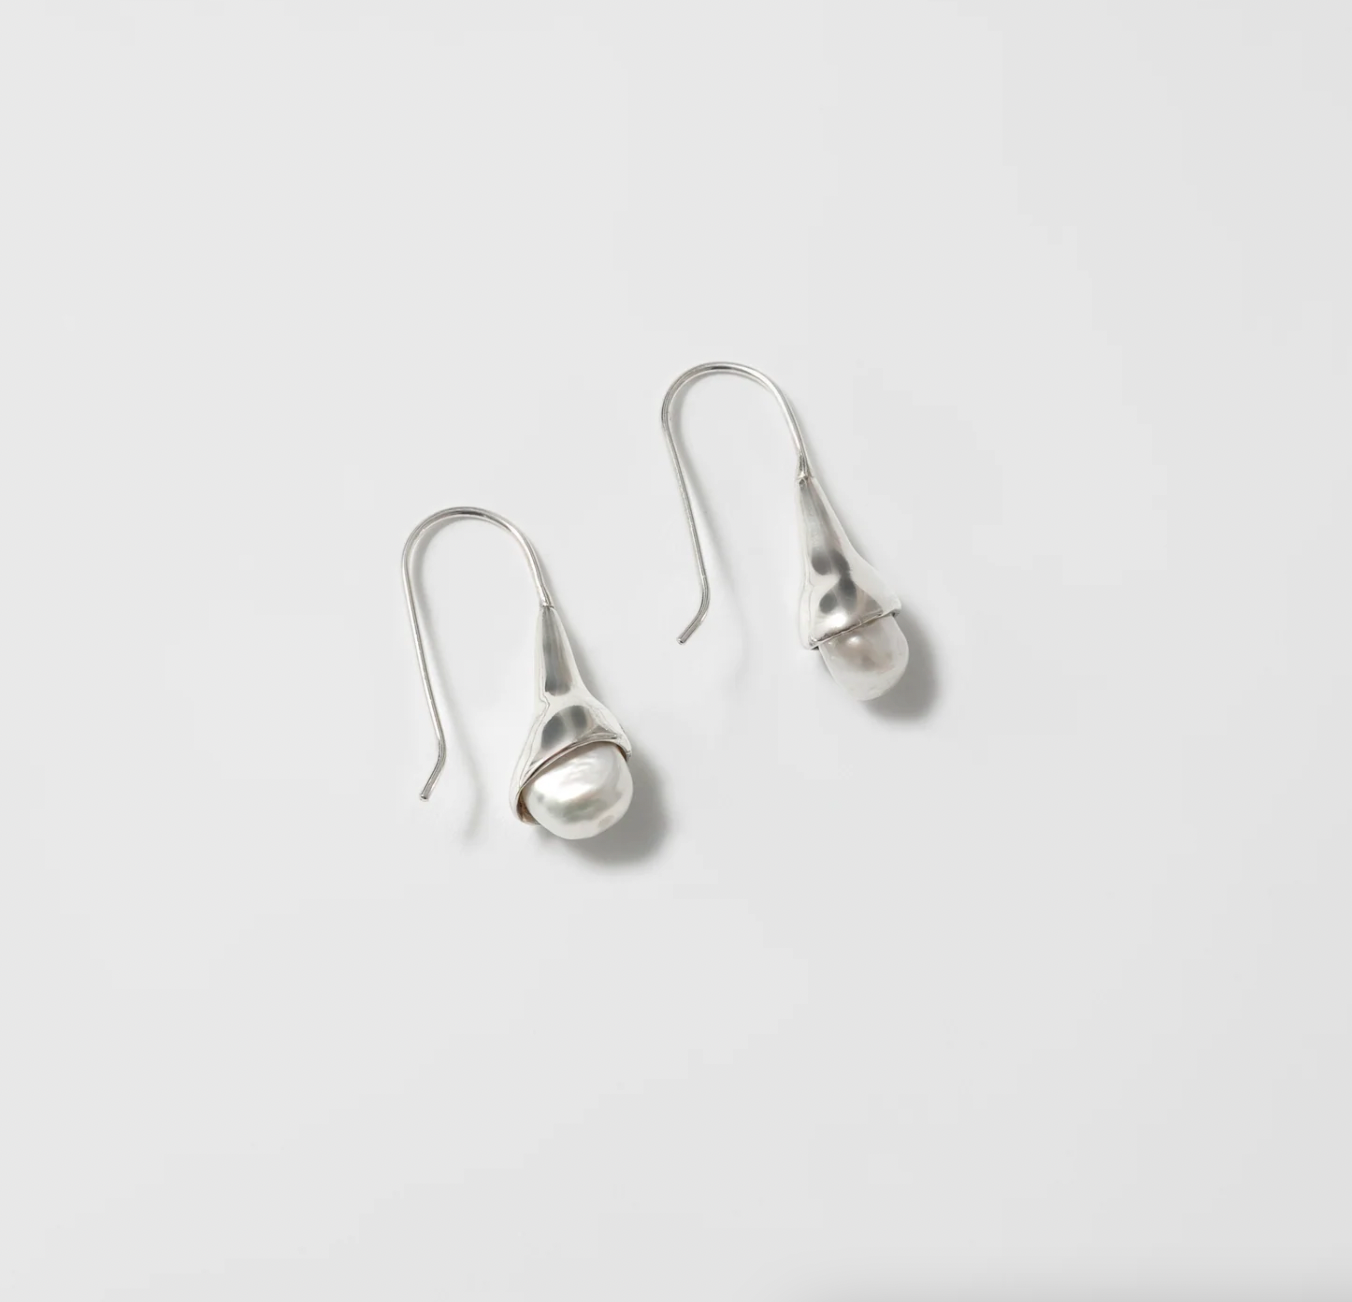 Product Image for Anna Earrings, Sterling Silver